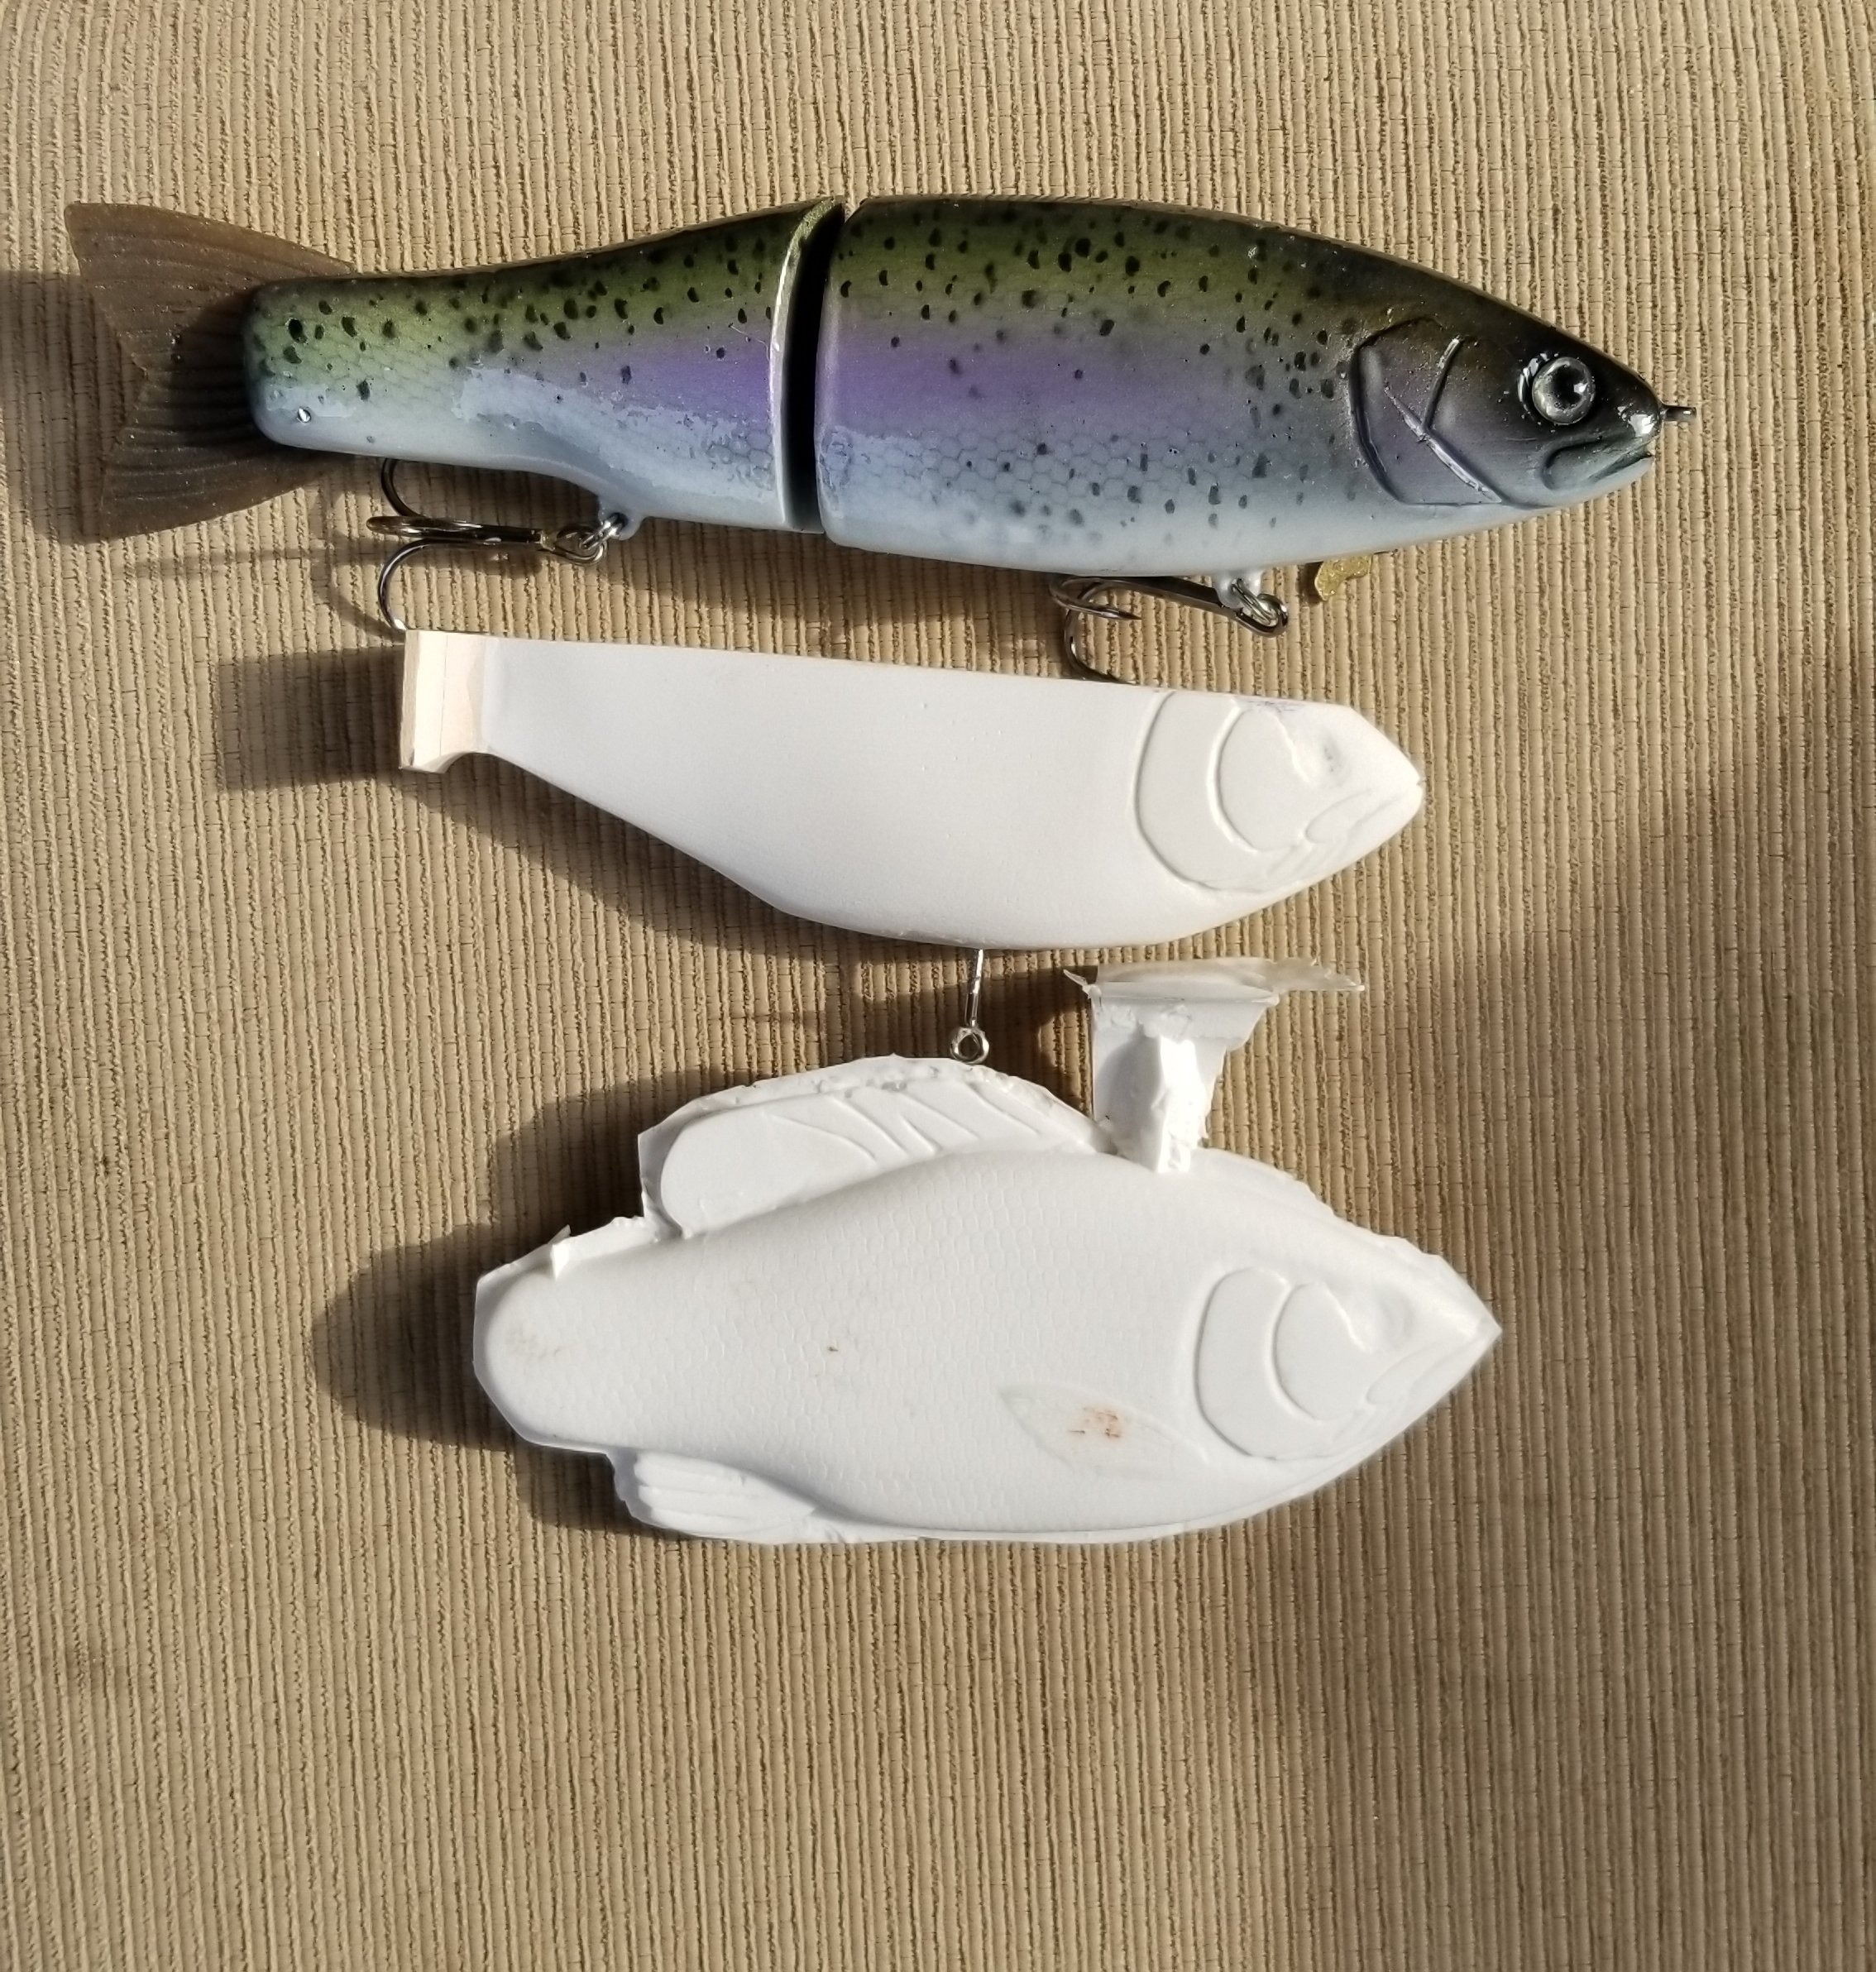 5 1/2 wooden swimbait - Hard Baits -  - Tackle  Building Forums